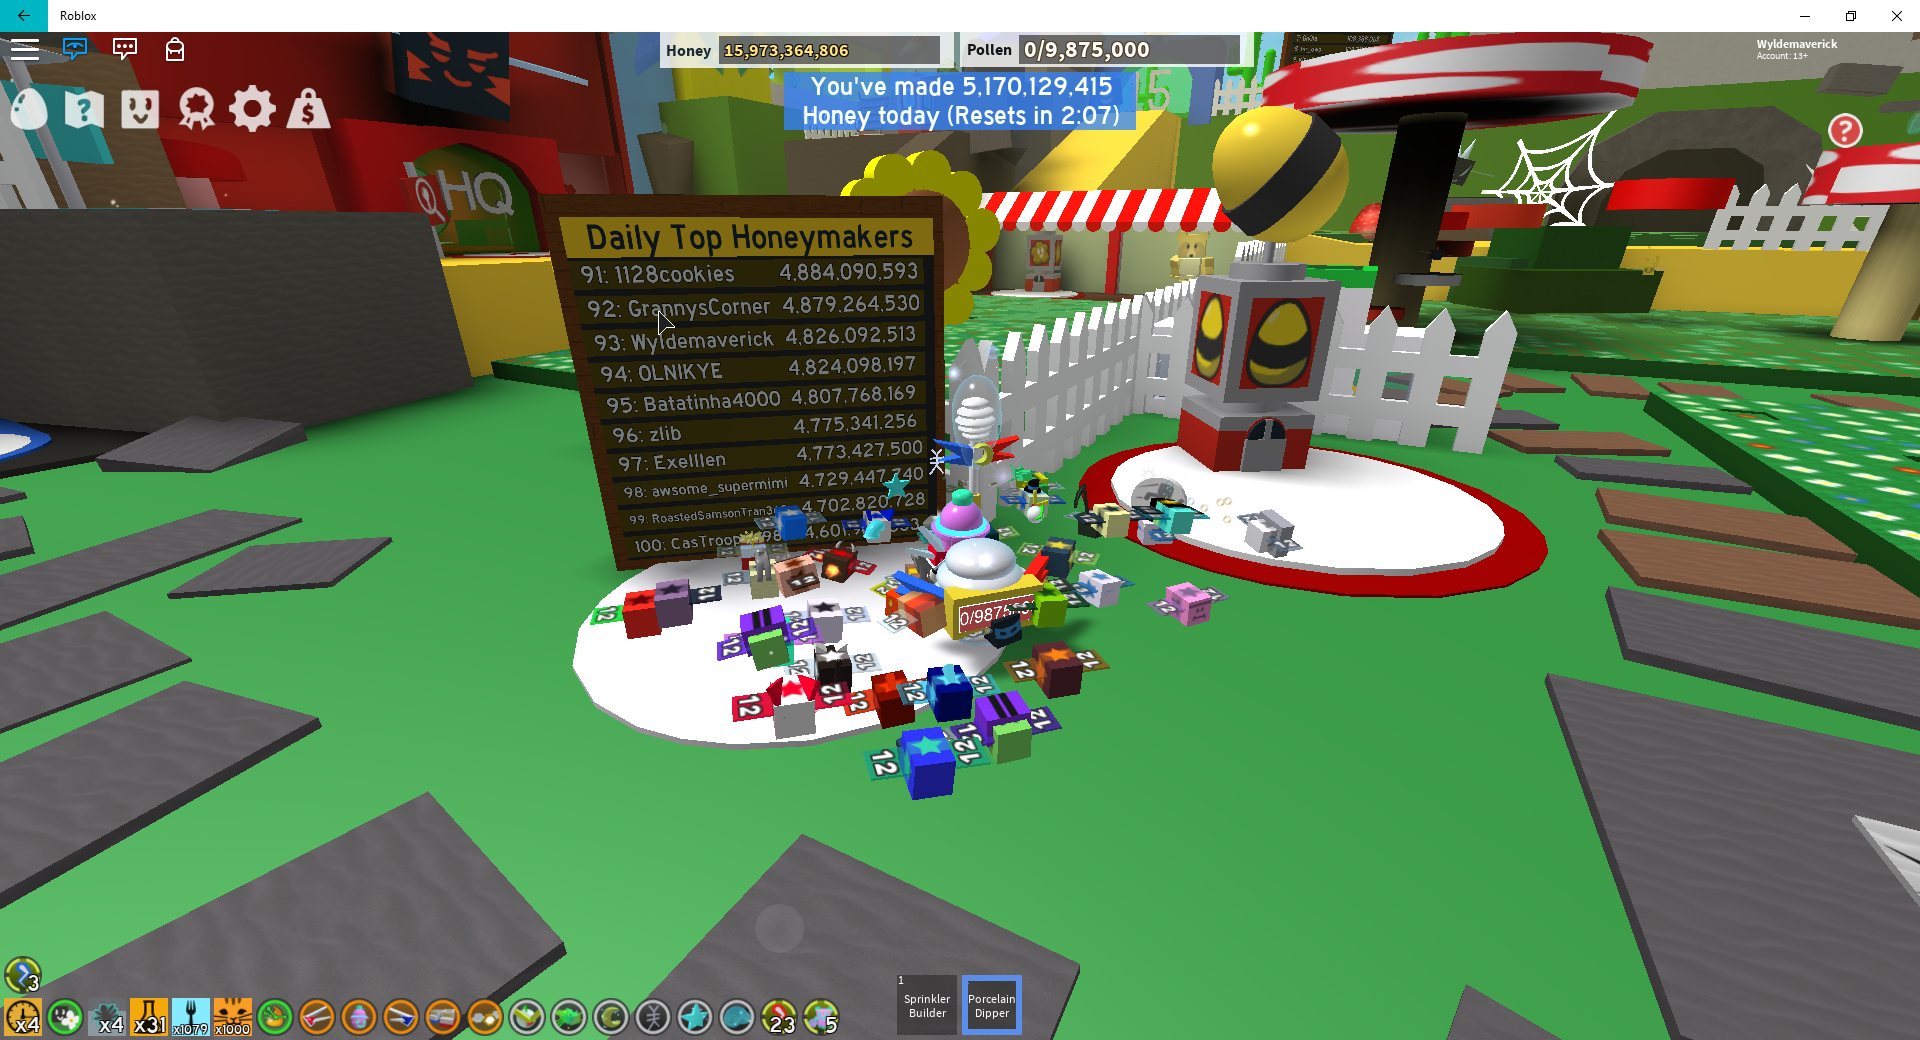 Another Cool Thing For Me Today Fandom - zlib roblox